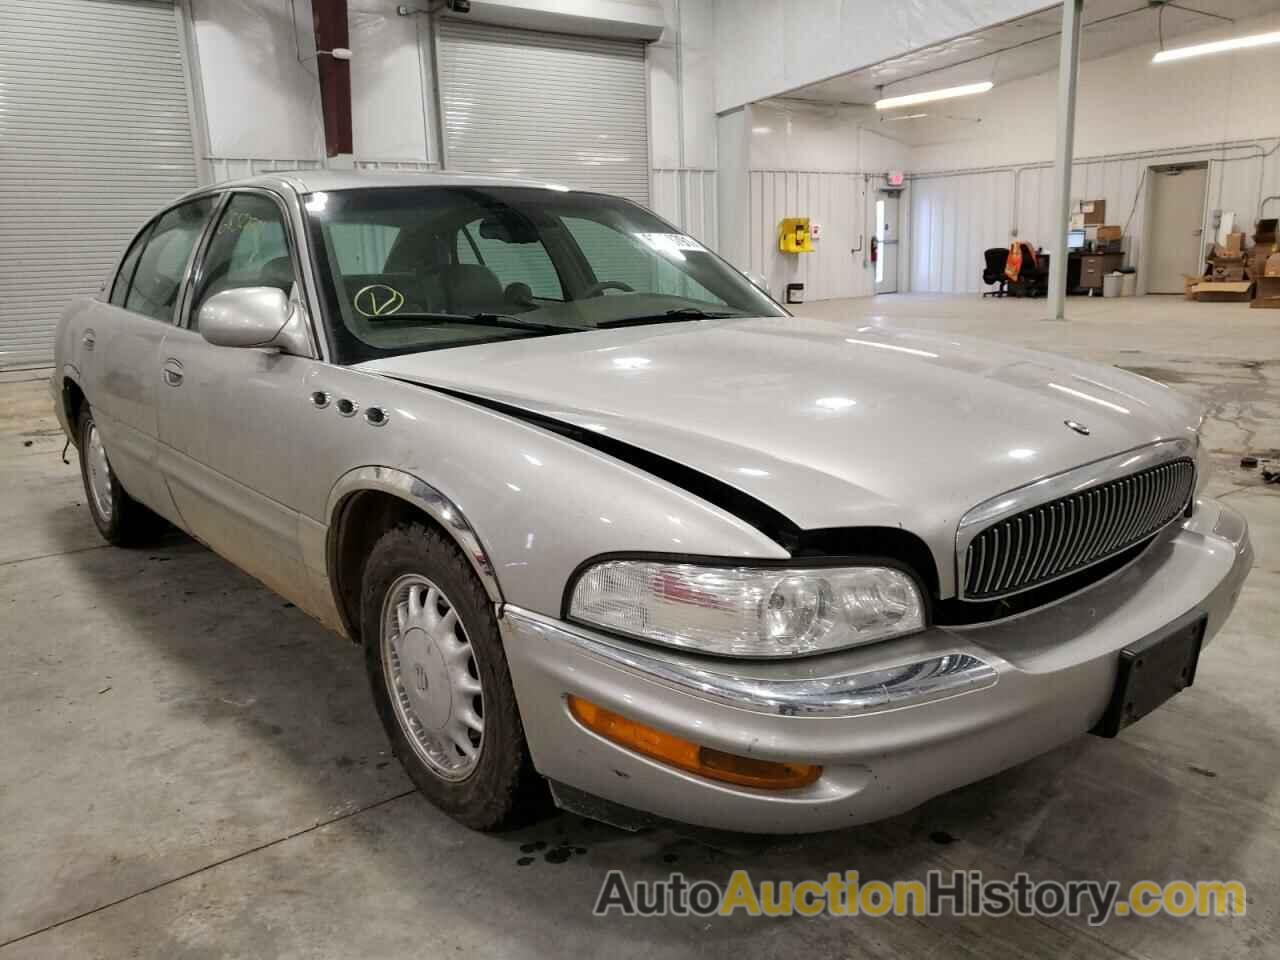 2005 BUICK PARK AVE, 1G4CW54K254108085